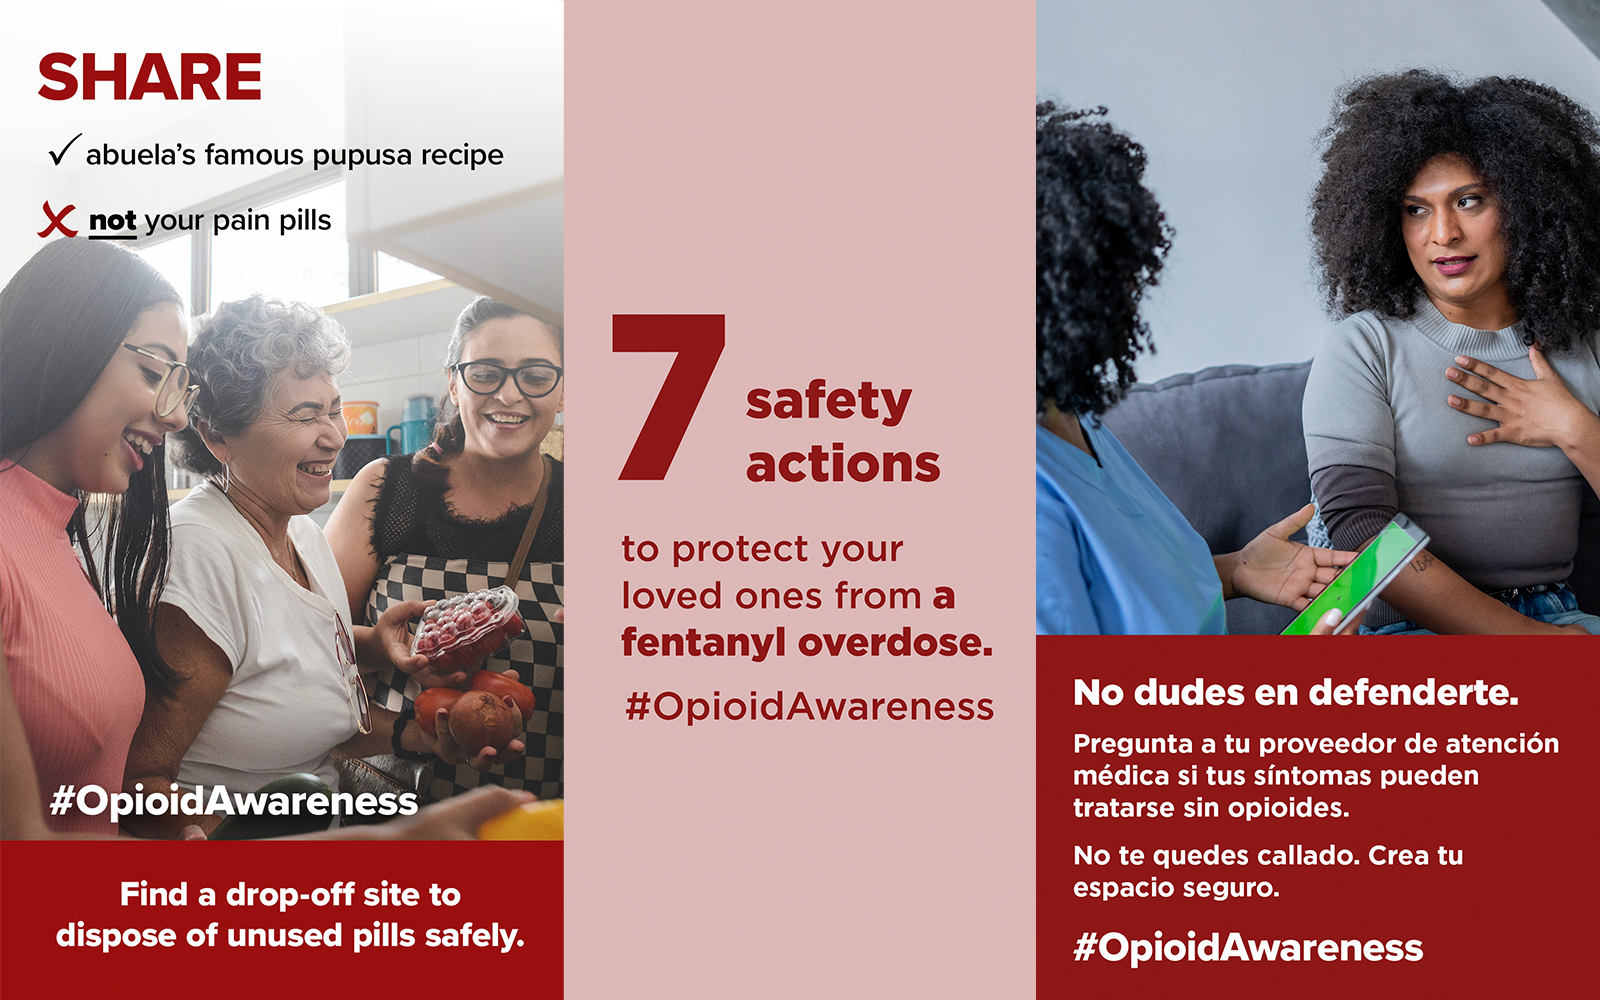 images from the opioid campaign. Left, a multigenerational family cooks with text overlaid emphasizing to share recipes, not pills; middle, 7 safety actions to protect your loved ones from an overdose; right, a woman speaks with her doctor with spanish translated text.